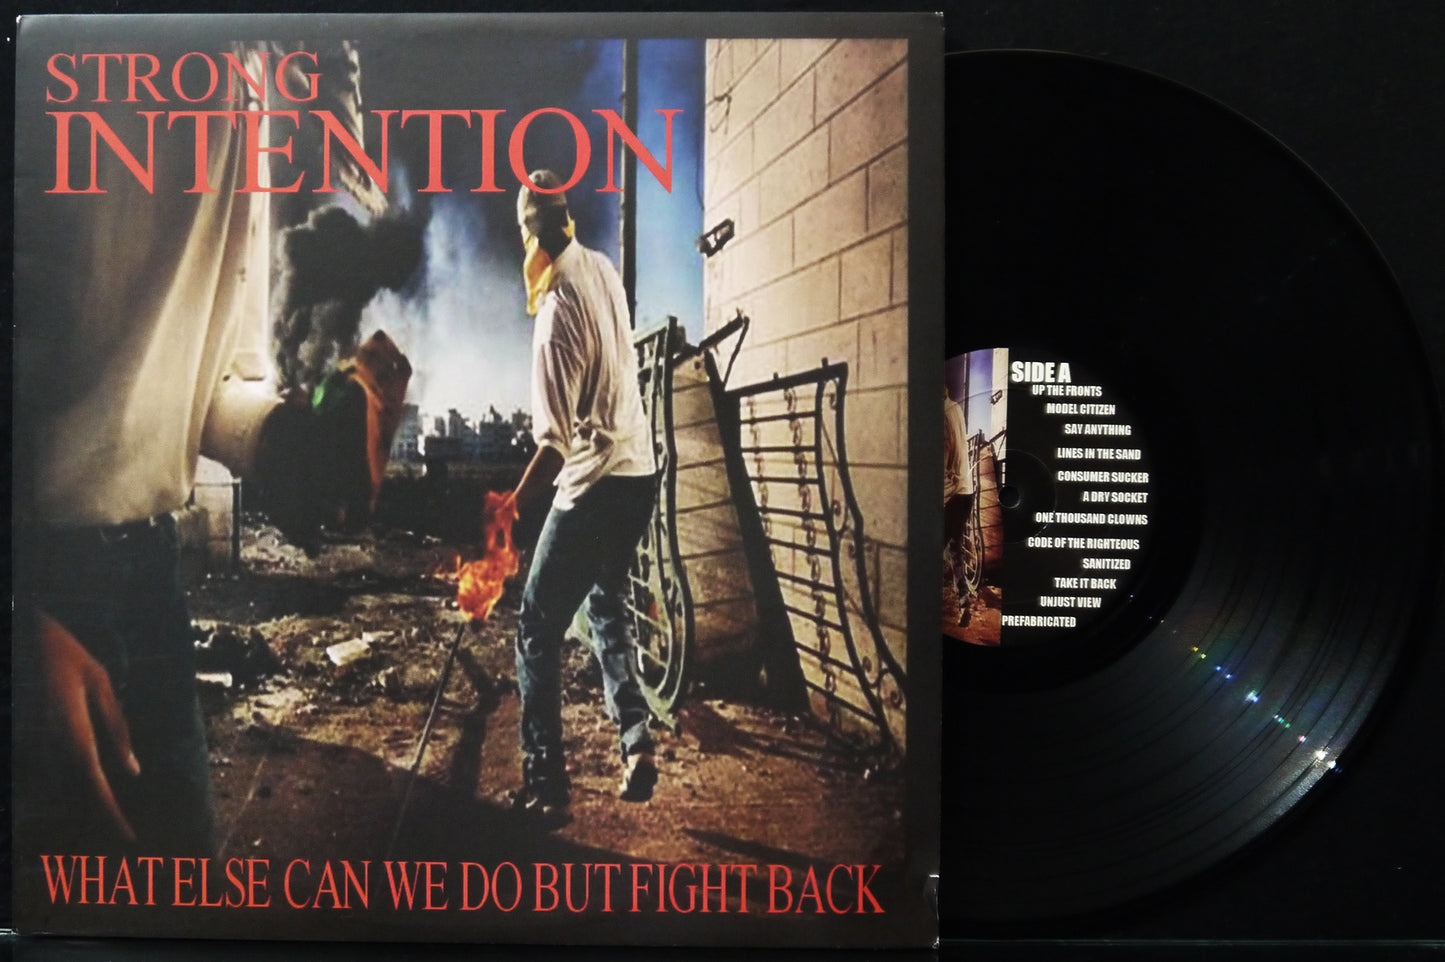 STRONG INTENTION - What Else Can We Do But Fight Back 12"